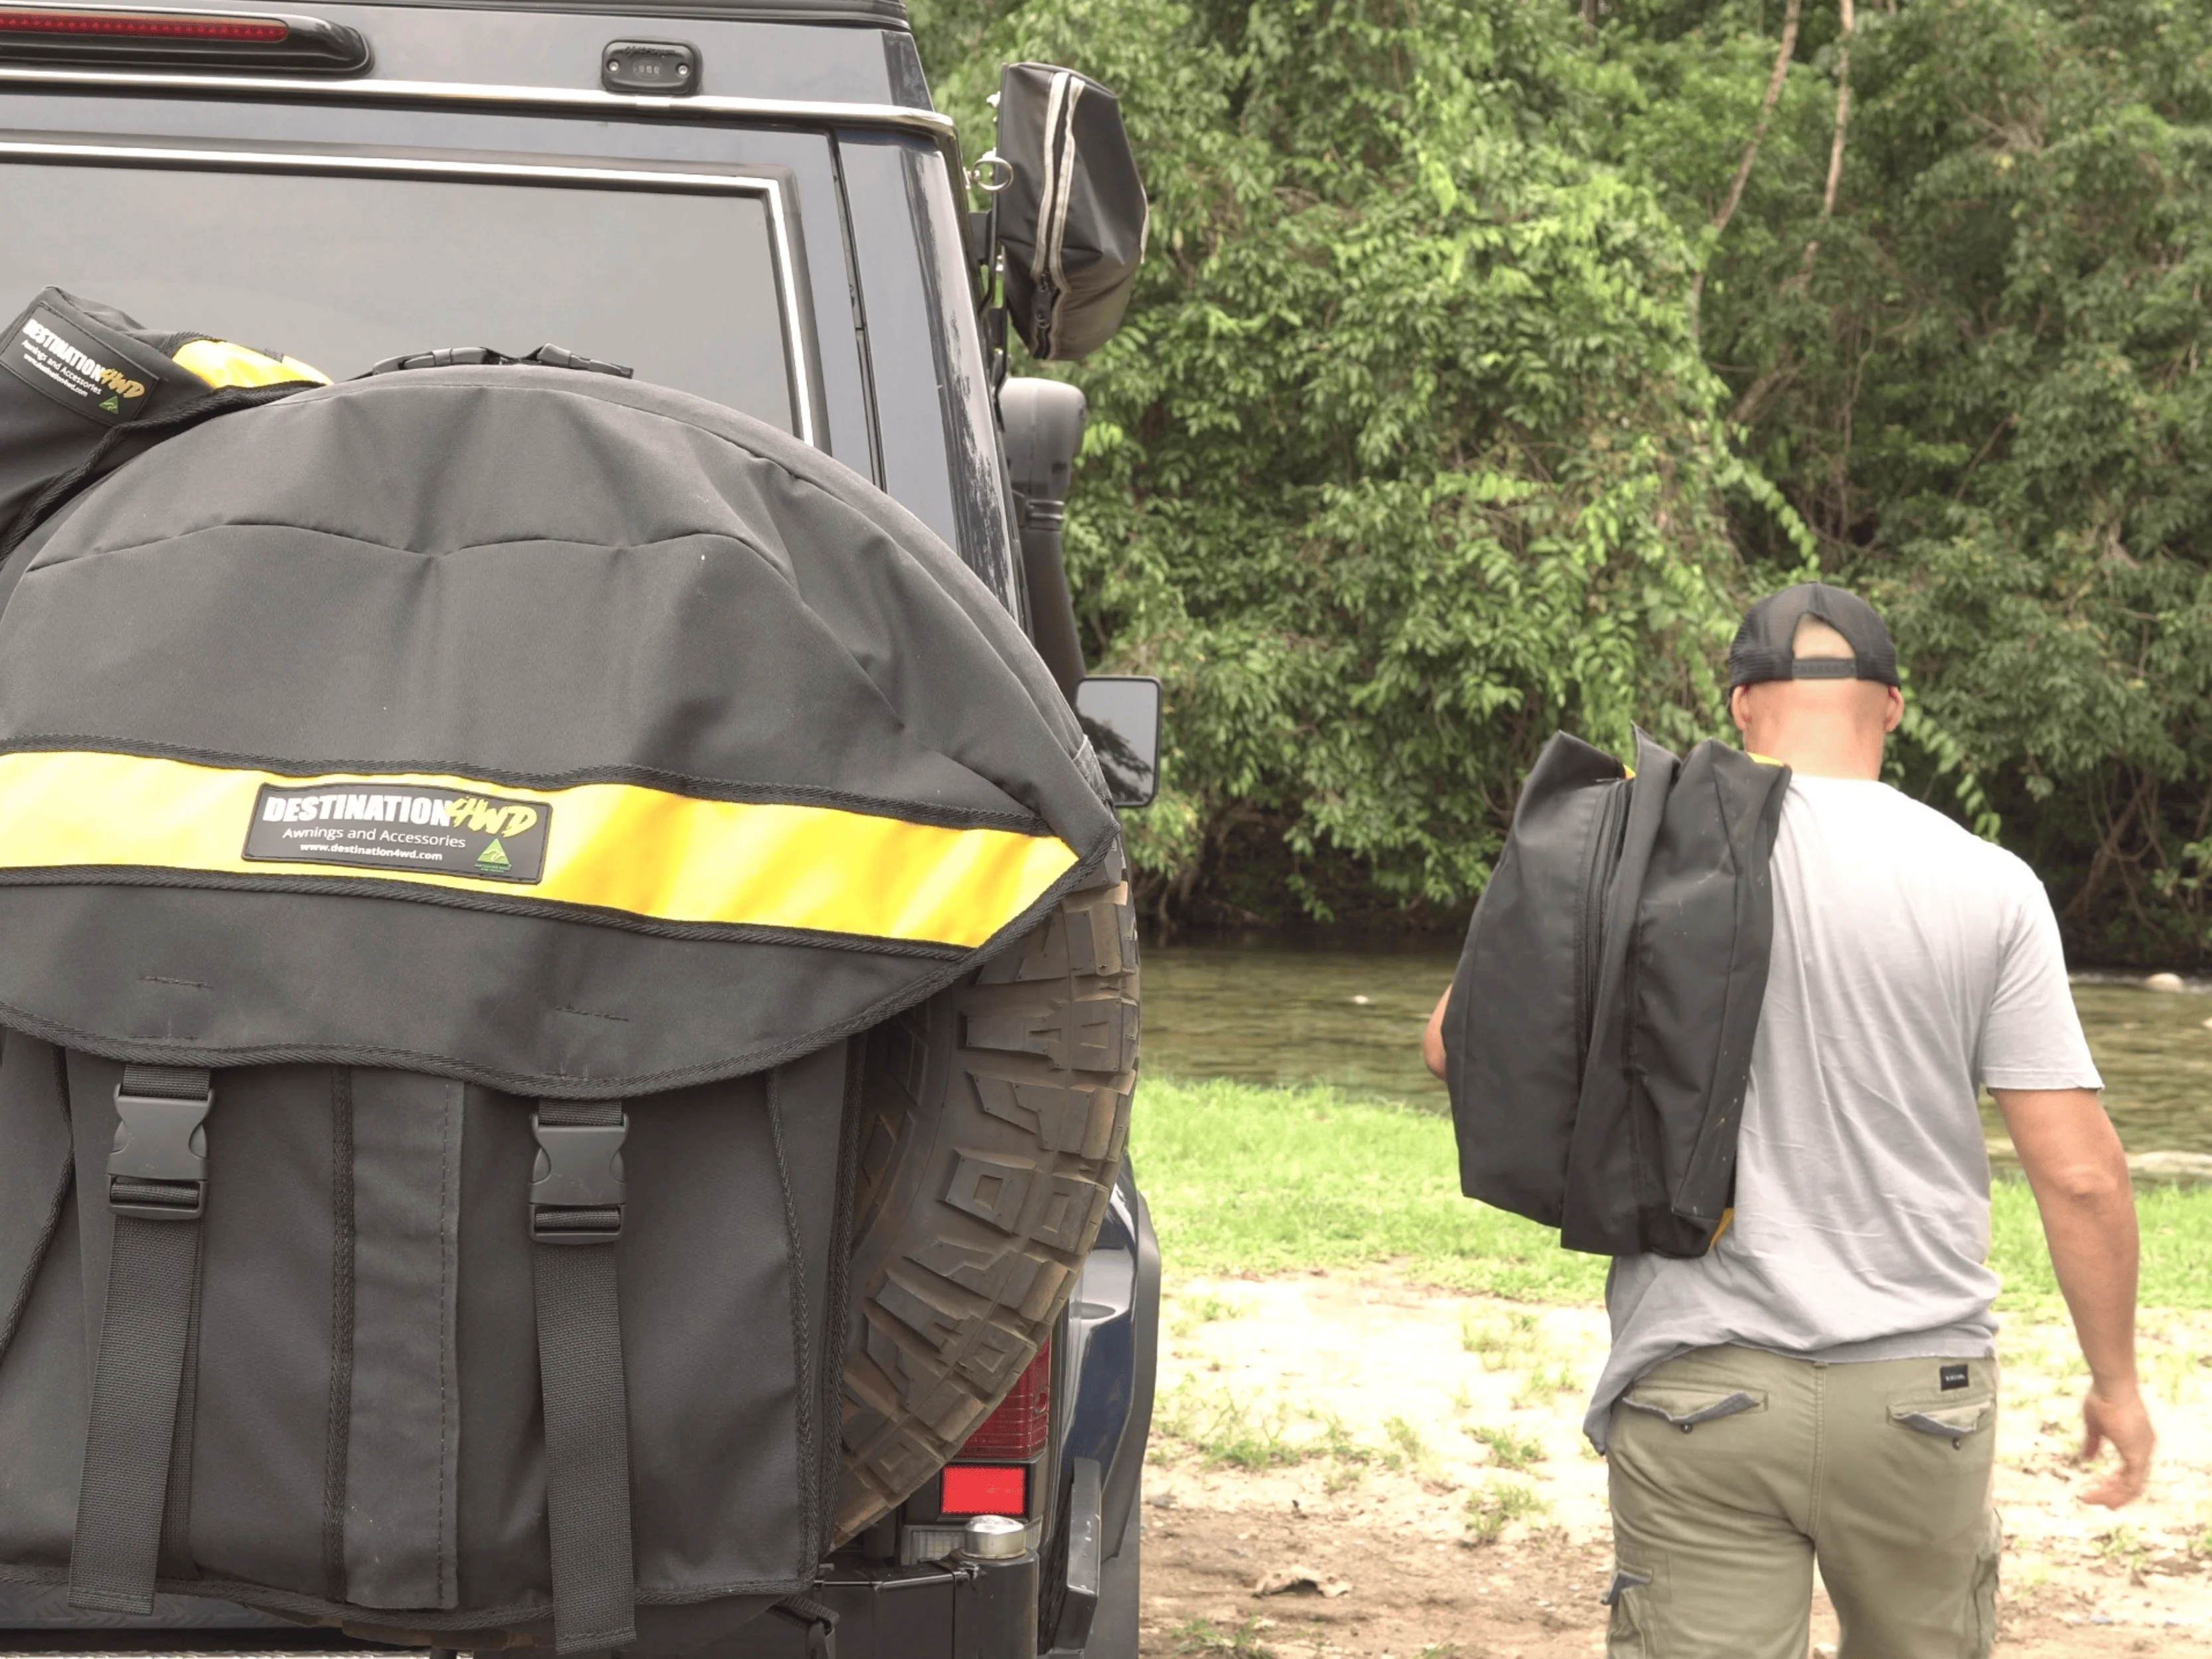 Destination4WD Garbage bag with bin inside 4WD awnings and accessories saddle bags